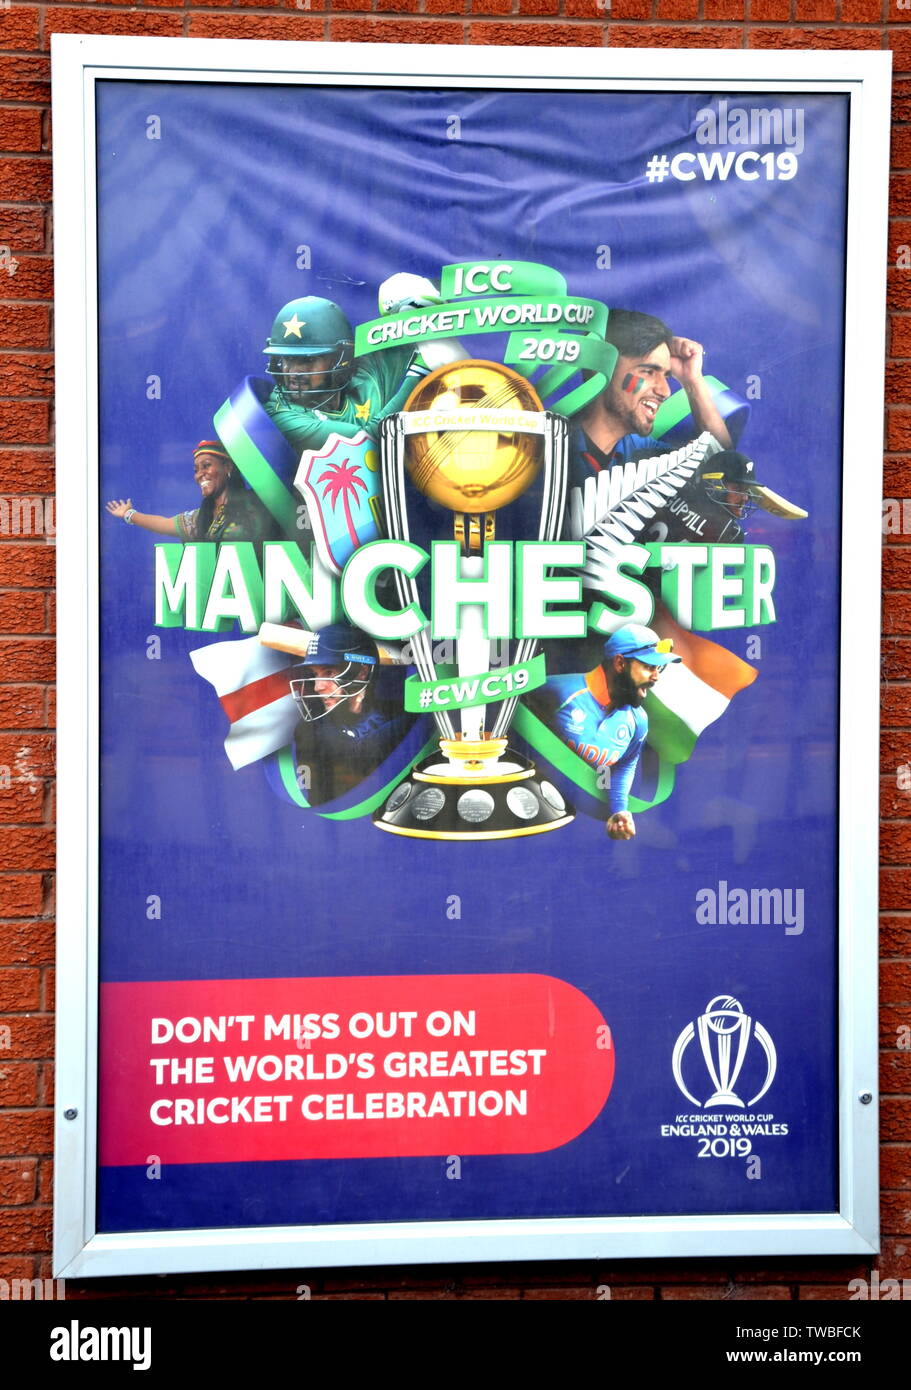 Signage for the ICC Cricket World Cup 2019 at Lancashire Cricket Club, Old Trafford, Manchester. The 2019  International Cricket Council (ICC) Cricket World Cup is being hosted by England and Wales from May 30th to July 14th, 2019. Six matches are being held at Old Trafford, Manchester, more than at any other venue. Stock Photo